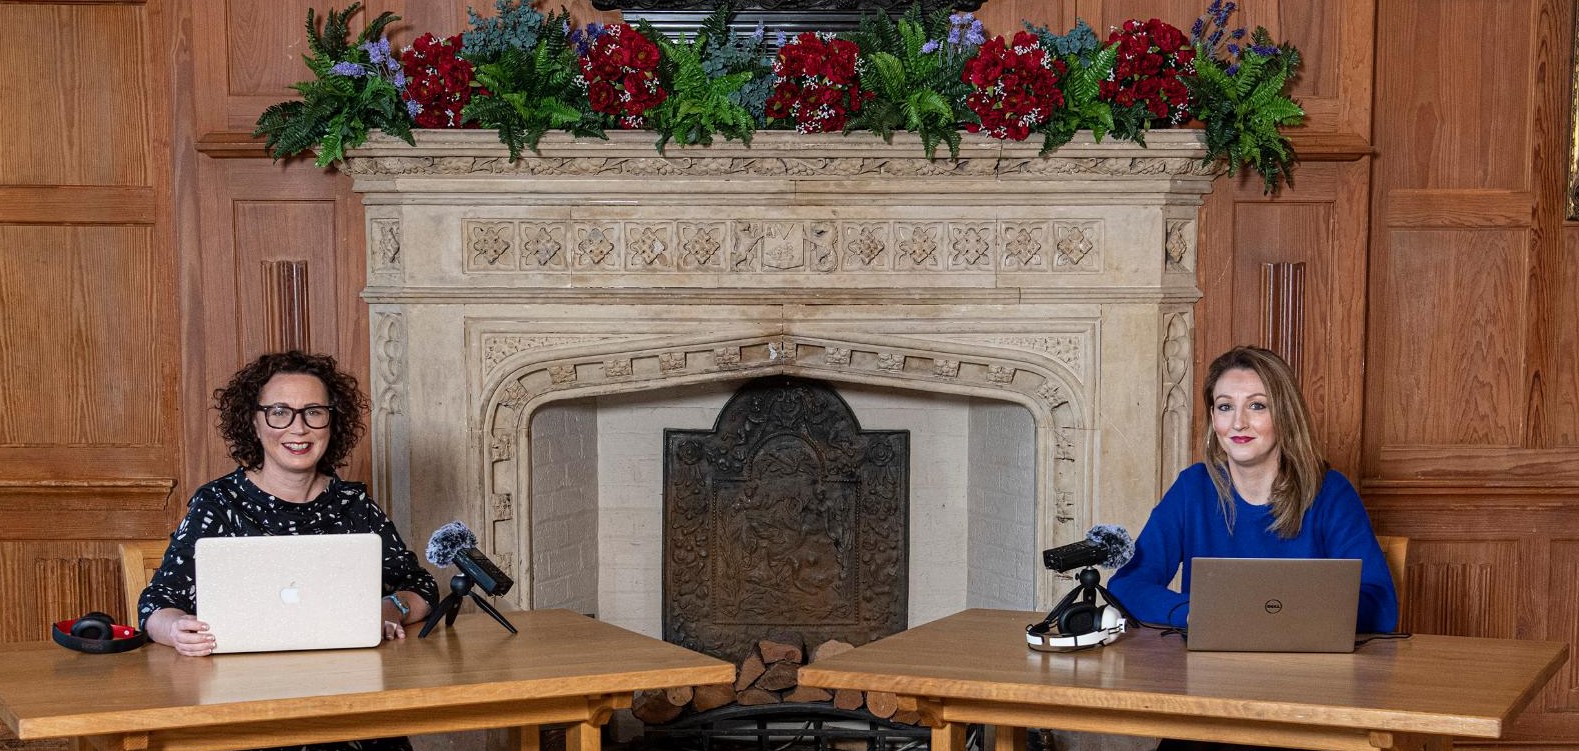 Dr Leanne McCormick (left) and Dr Elaine Farrell (right) seated in front of grand fireplace in the Great Hall at Queen's